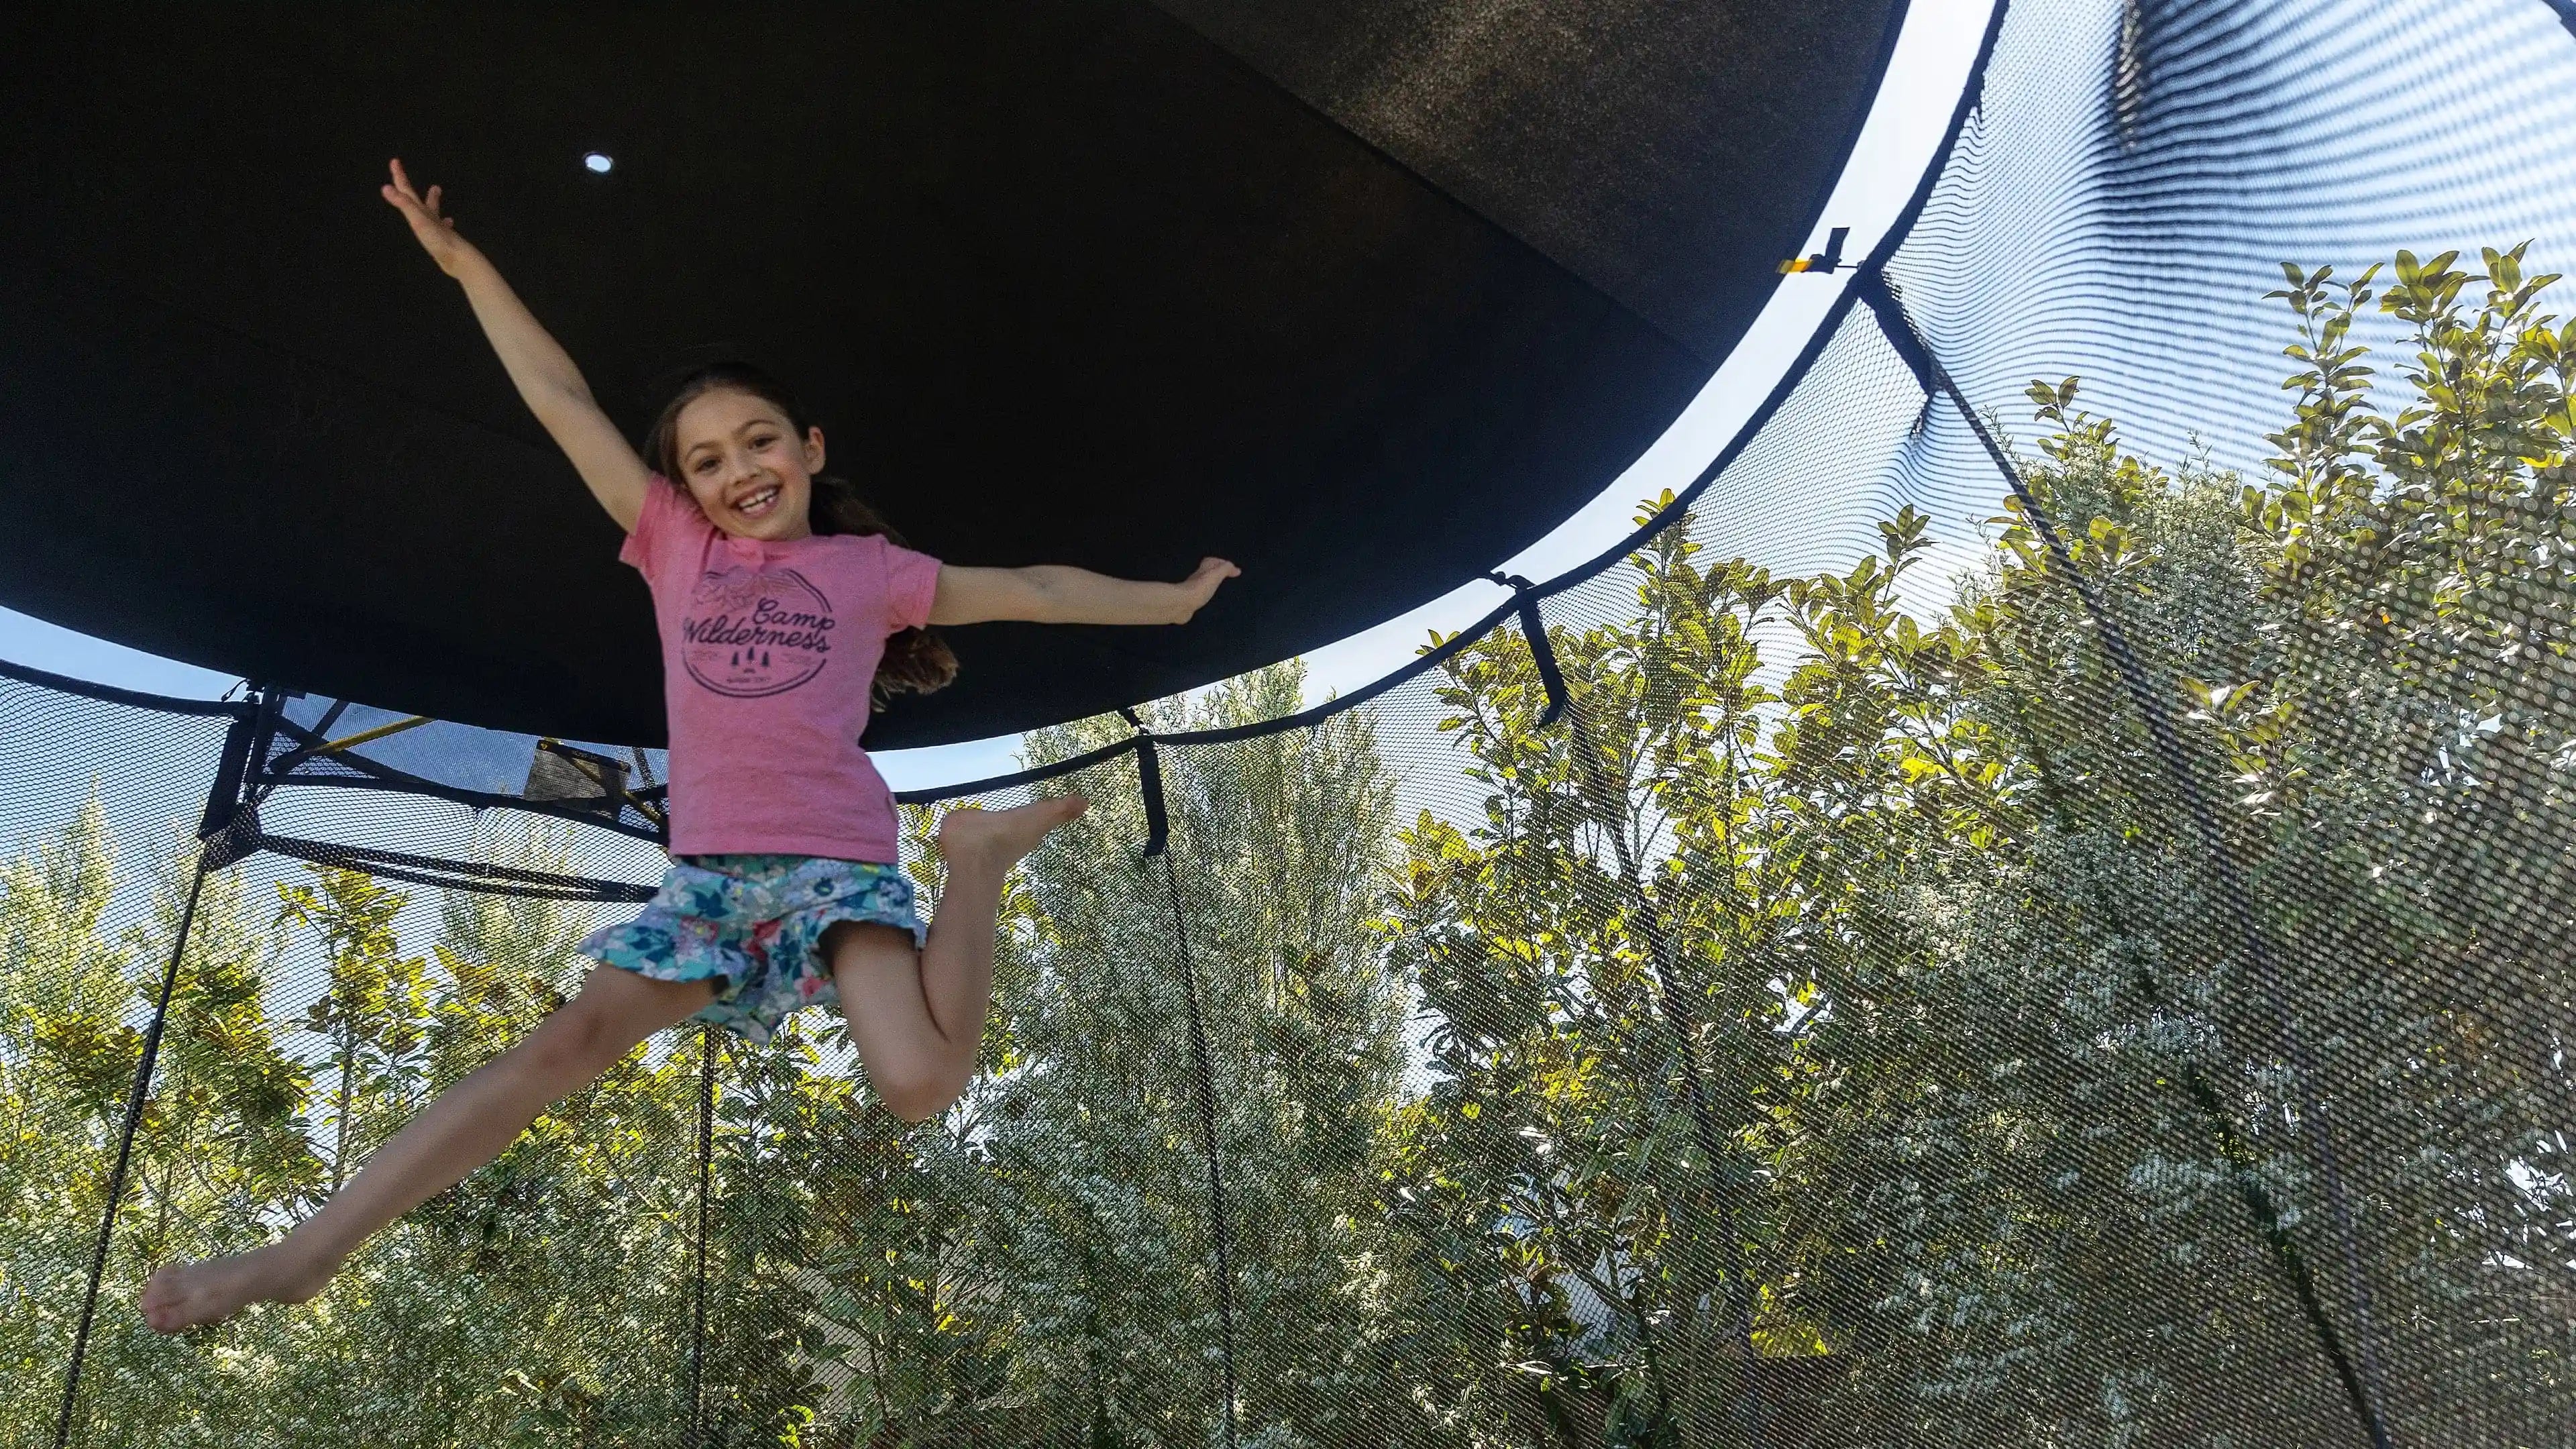 young girl jumping high on a trampoline with sun shade